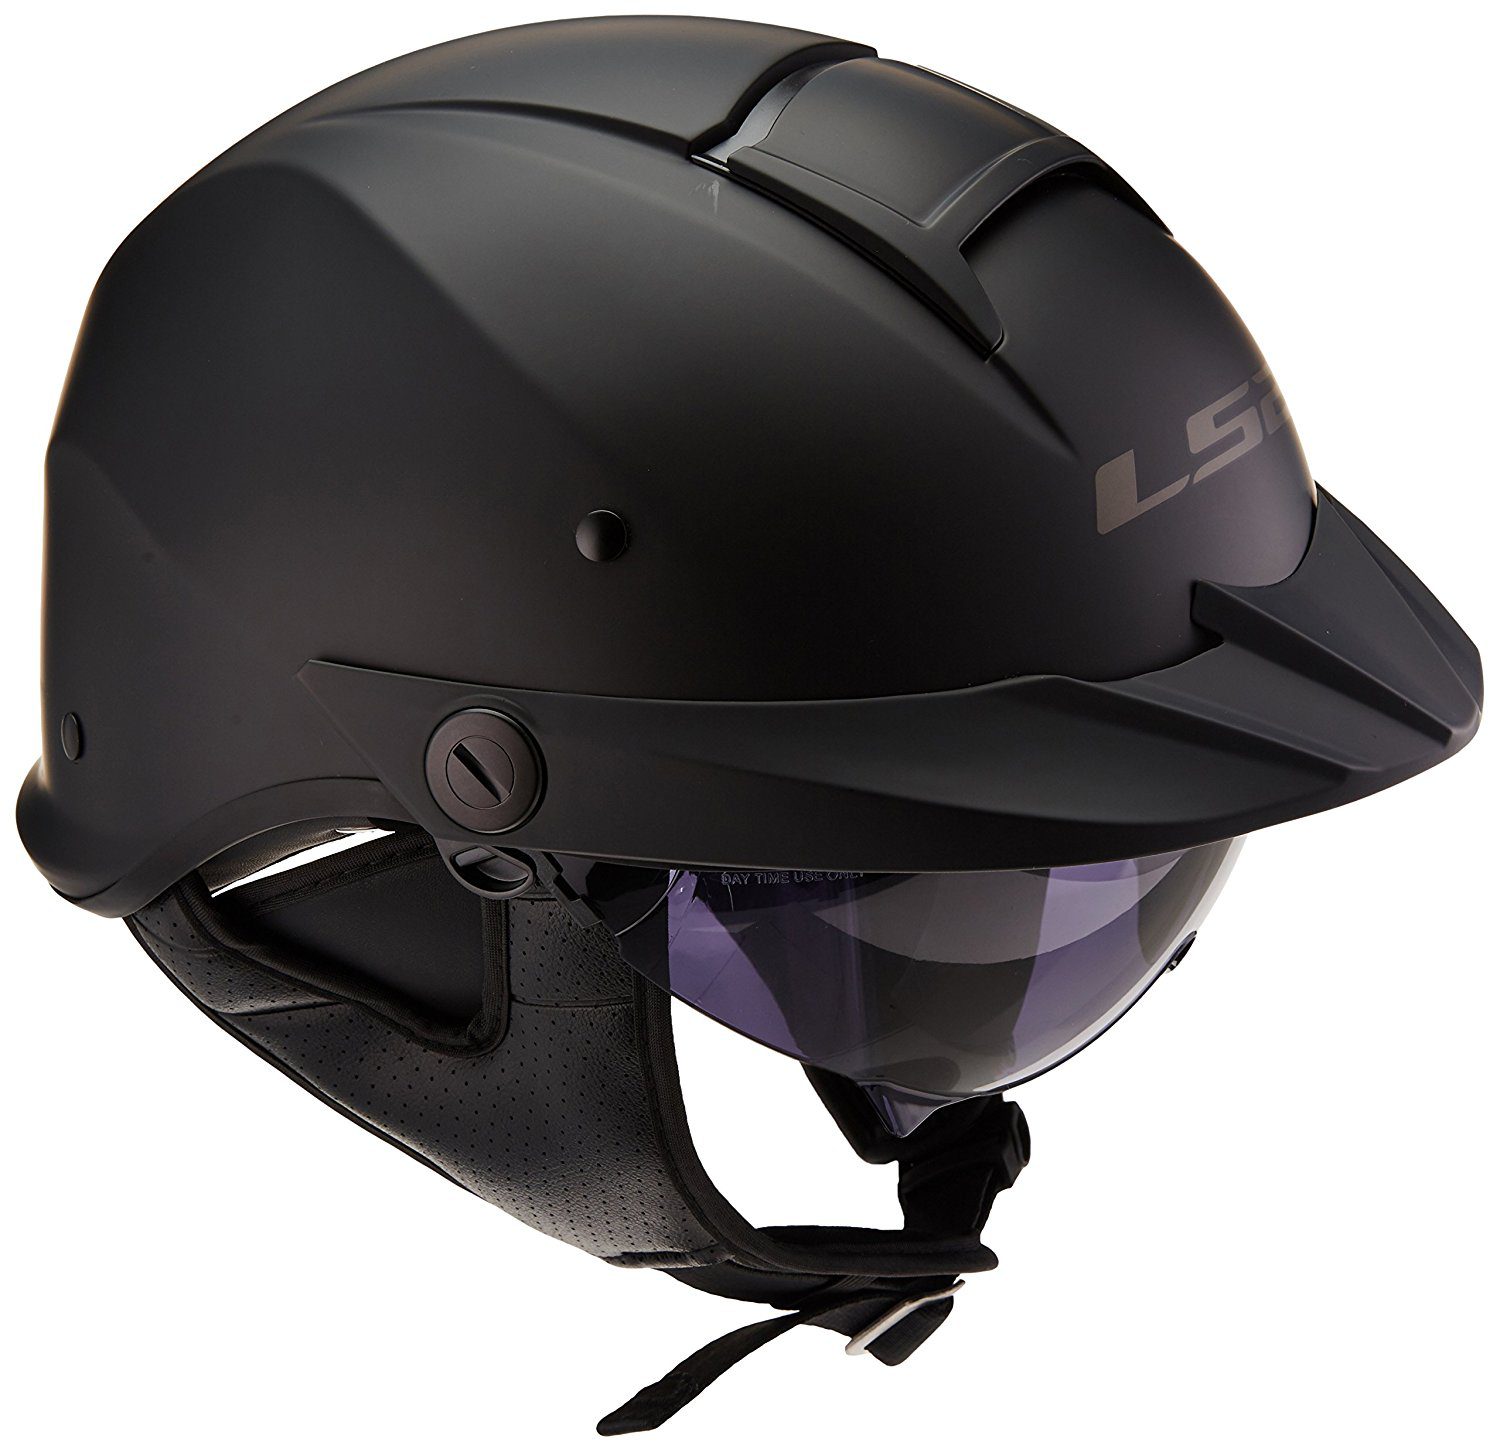 S.O.A. Gloss Pink Half Head Motorcycle Helmet with Visor DOT Approved 